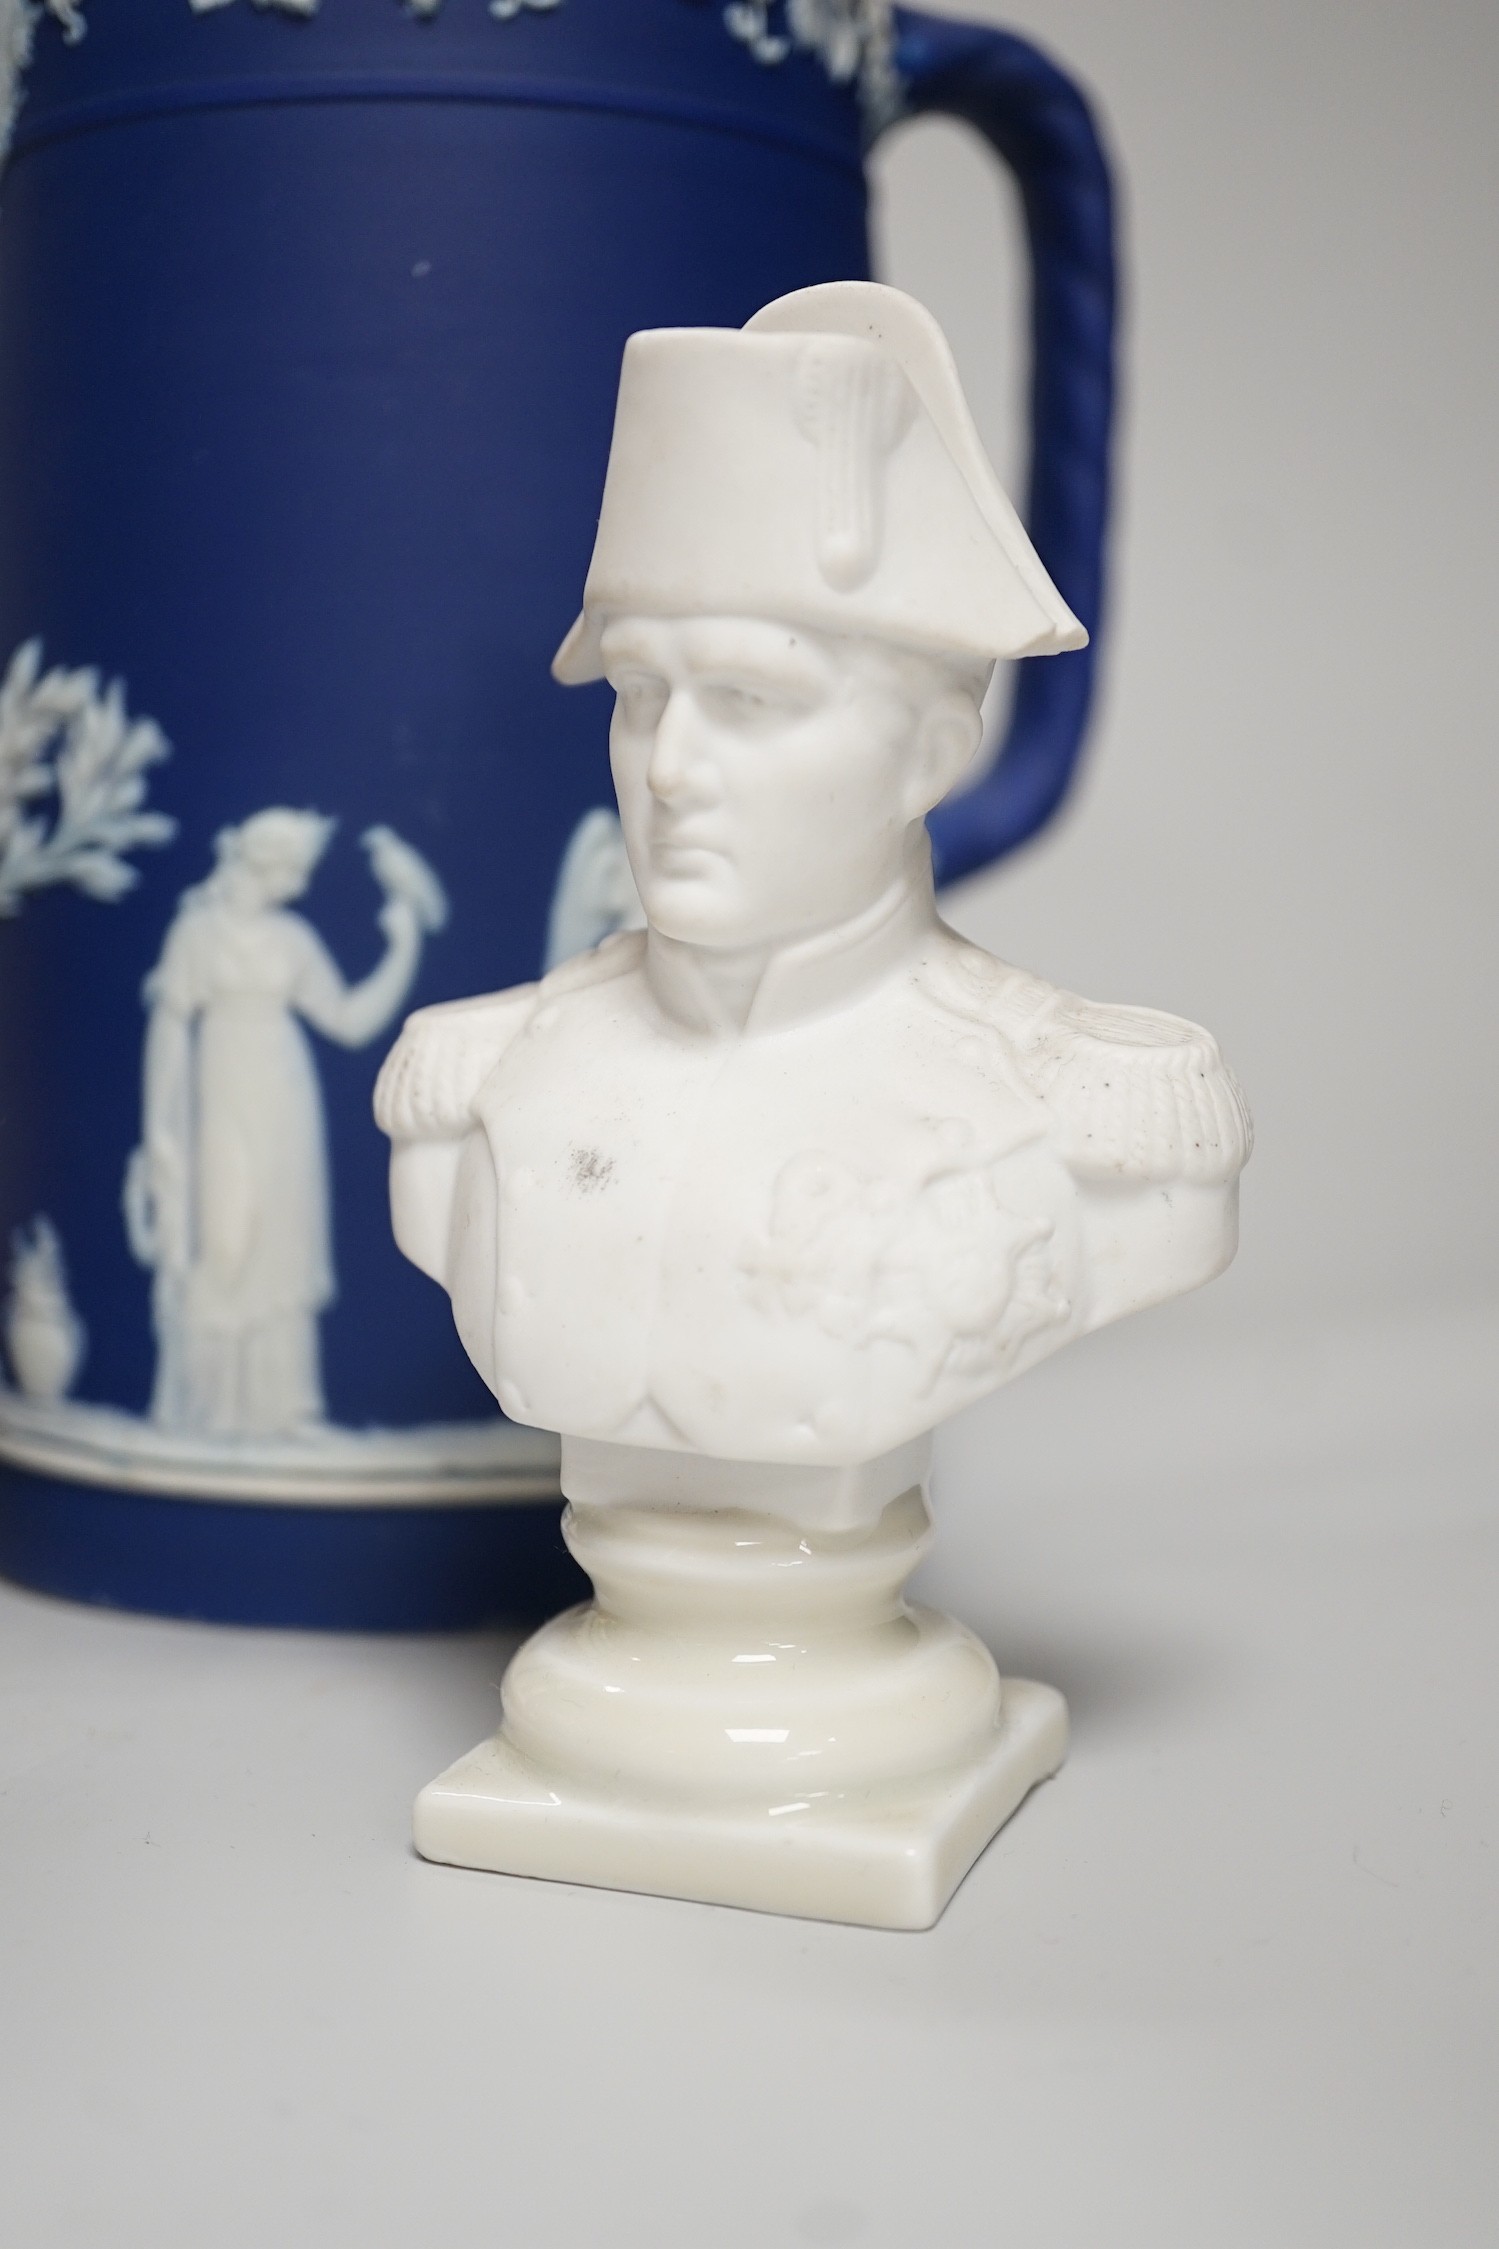 Three mid to late 19th century pieces of Wedgwood Jasperware, including a coffee pot and a small cache-pot, a pair of 19th century porcelain candlesticks converted into lamps